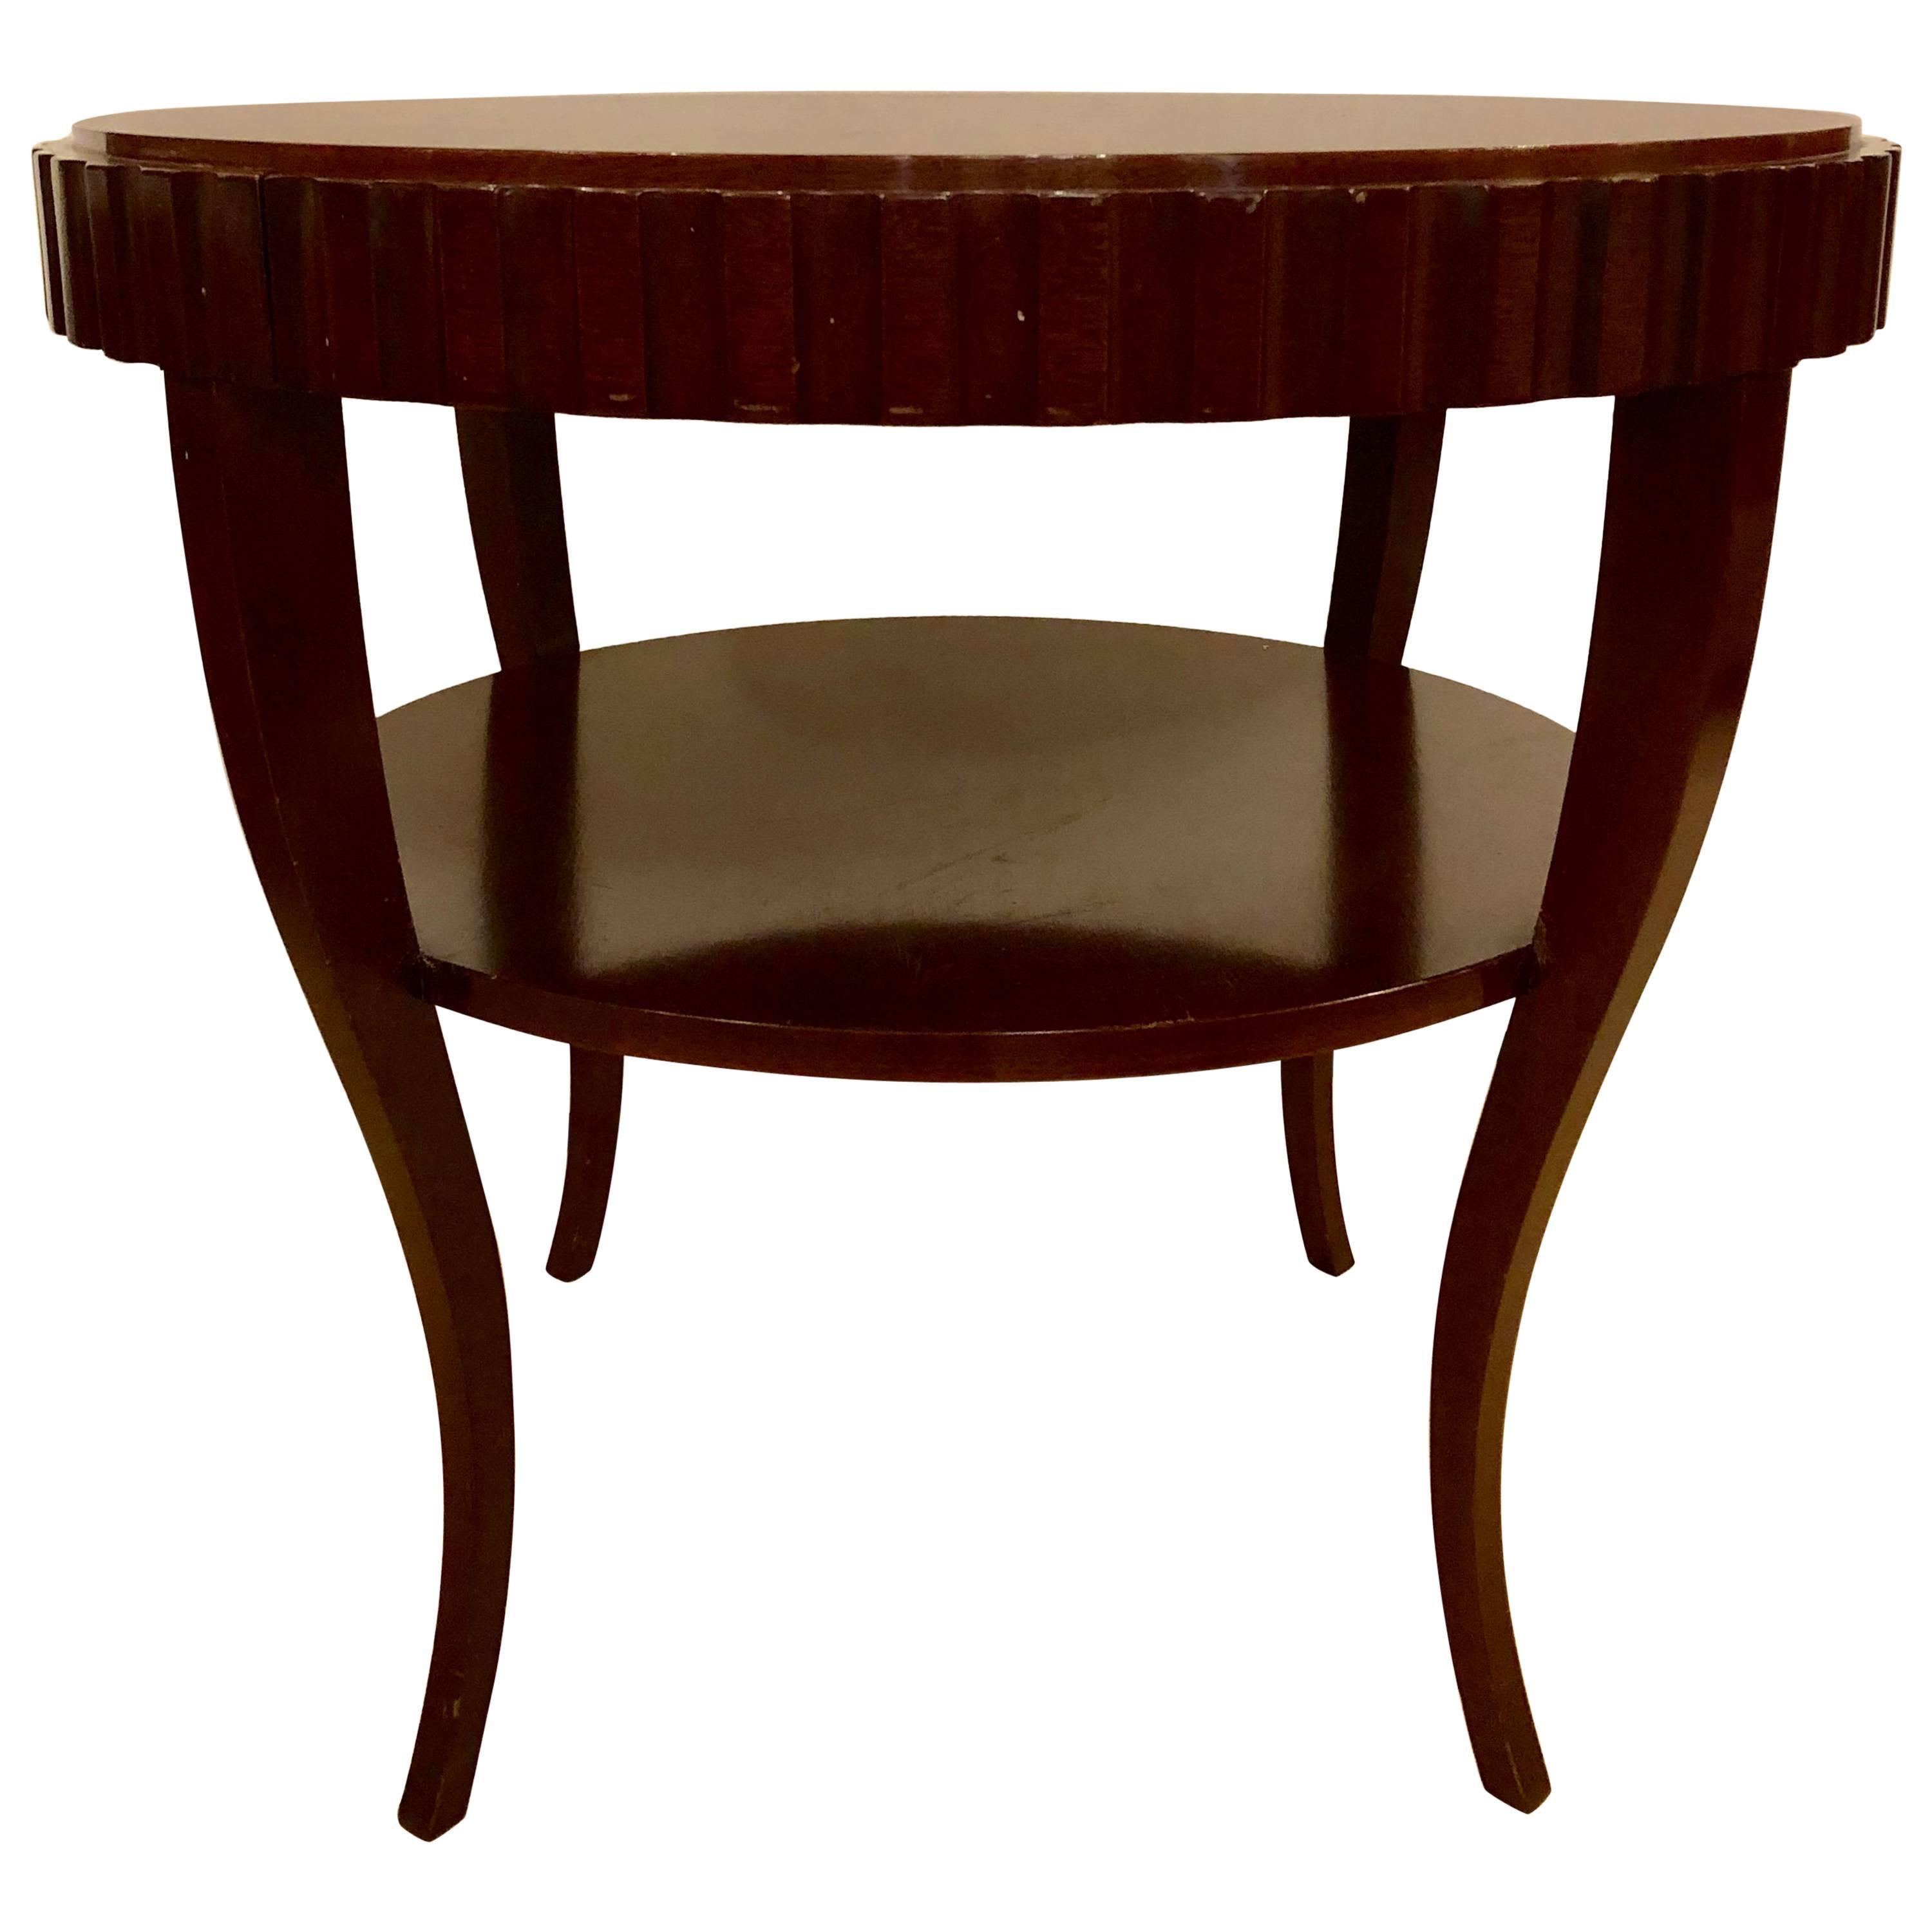 English Art Deco Style Wood Single Drawer Centre or End Table